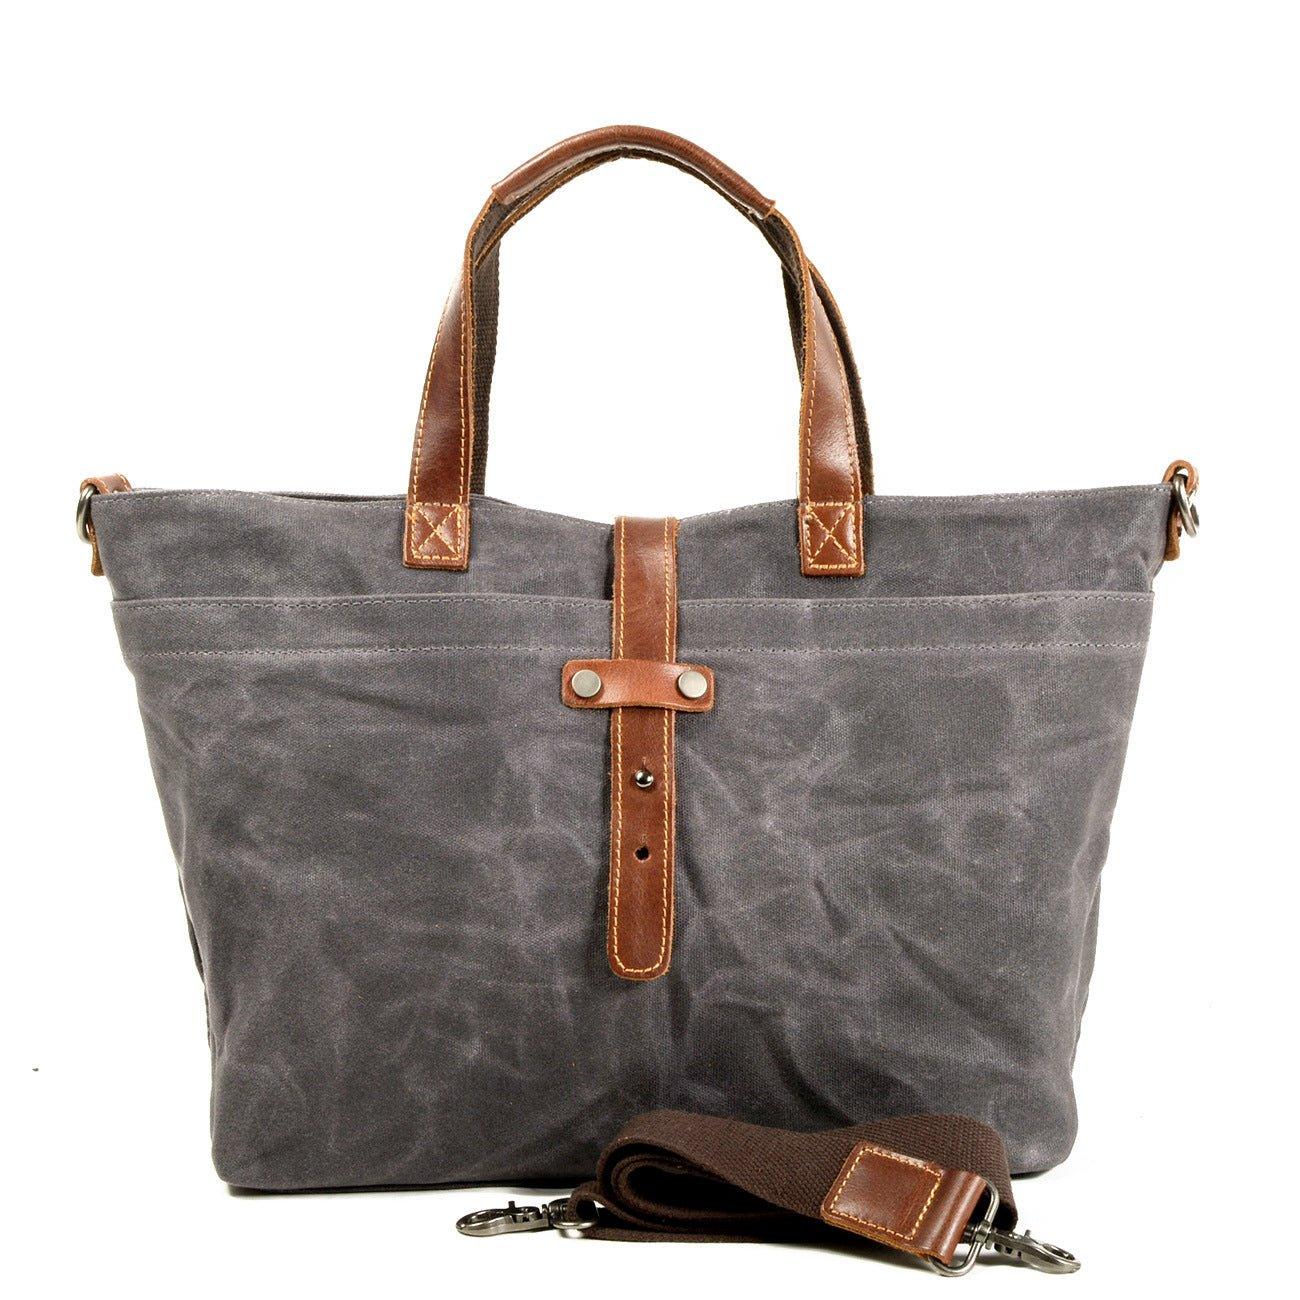 Woosir Waxed Canvas Tote Bag with Shoulder Strap